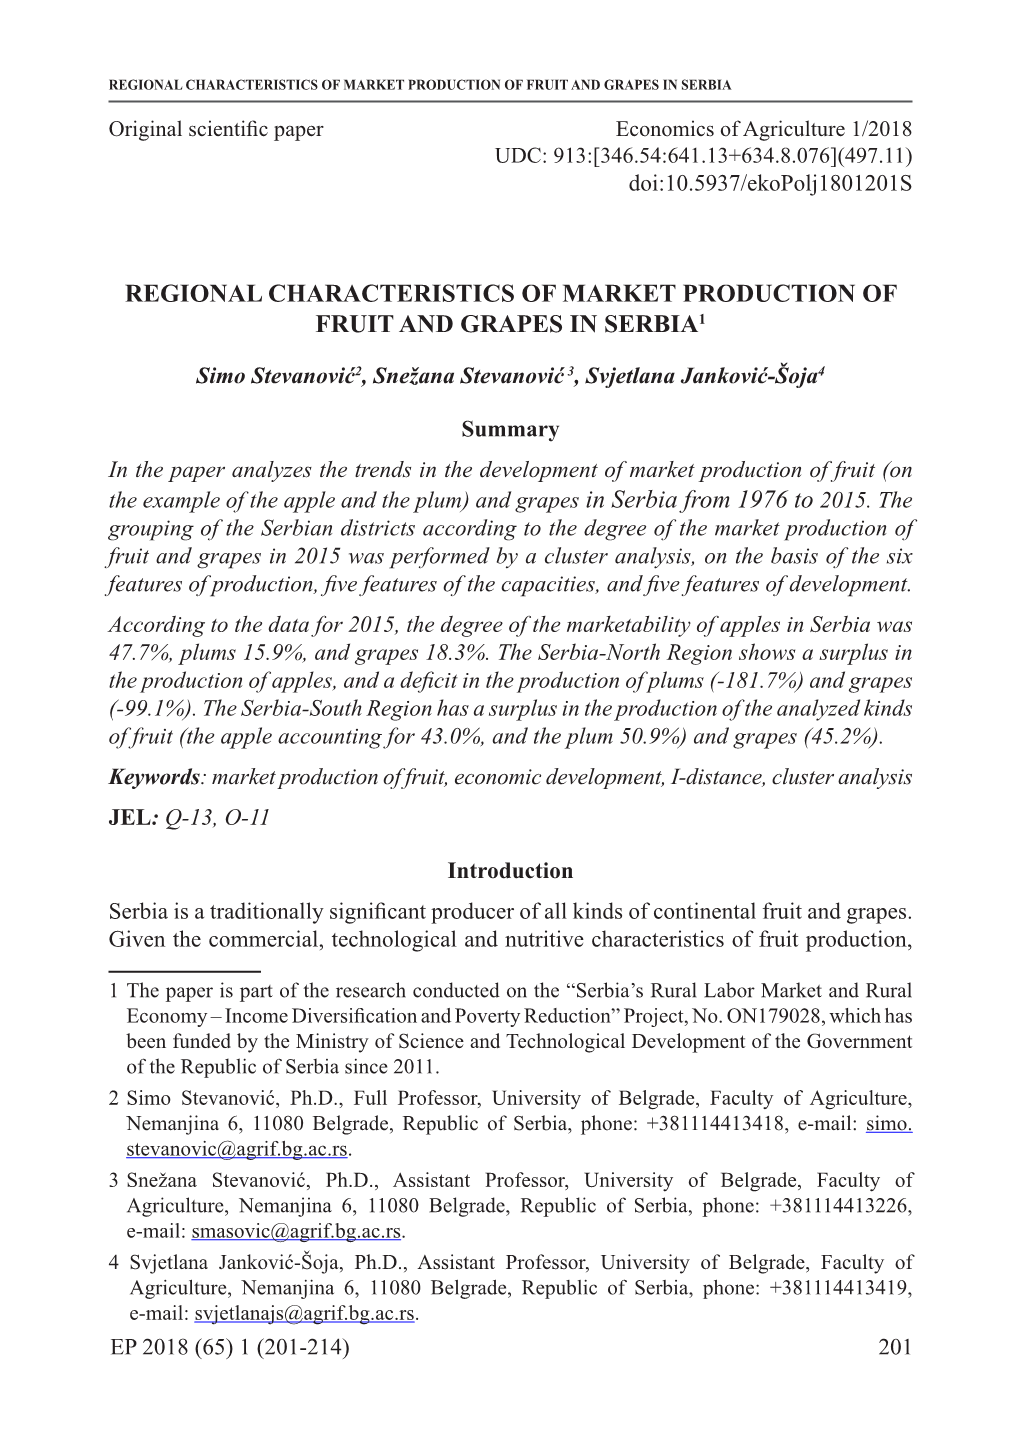 Regional Characteristics of Market Production of Fruit and Grapes in Serbia